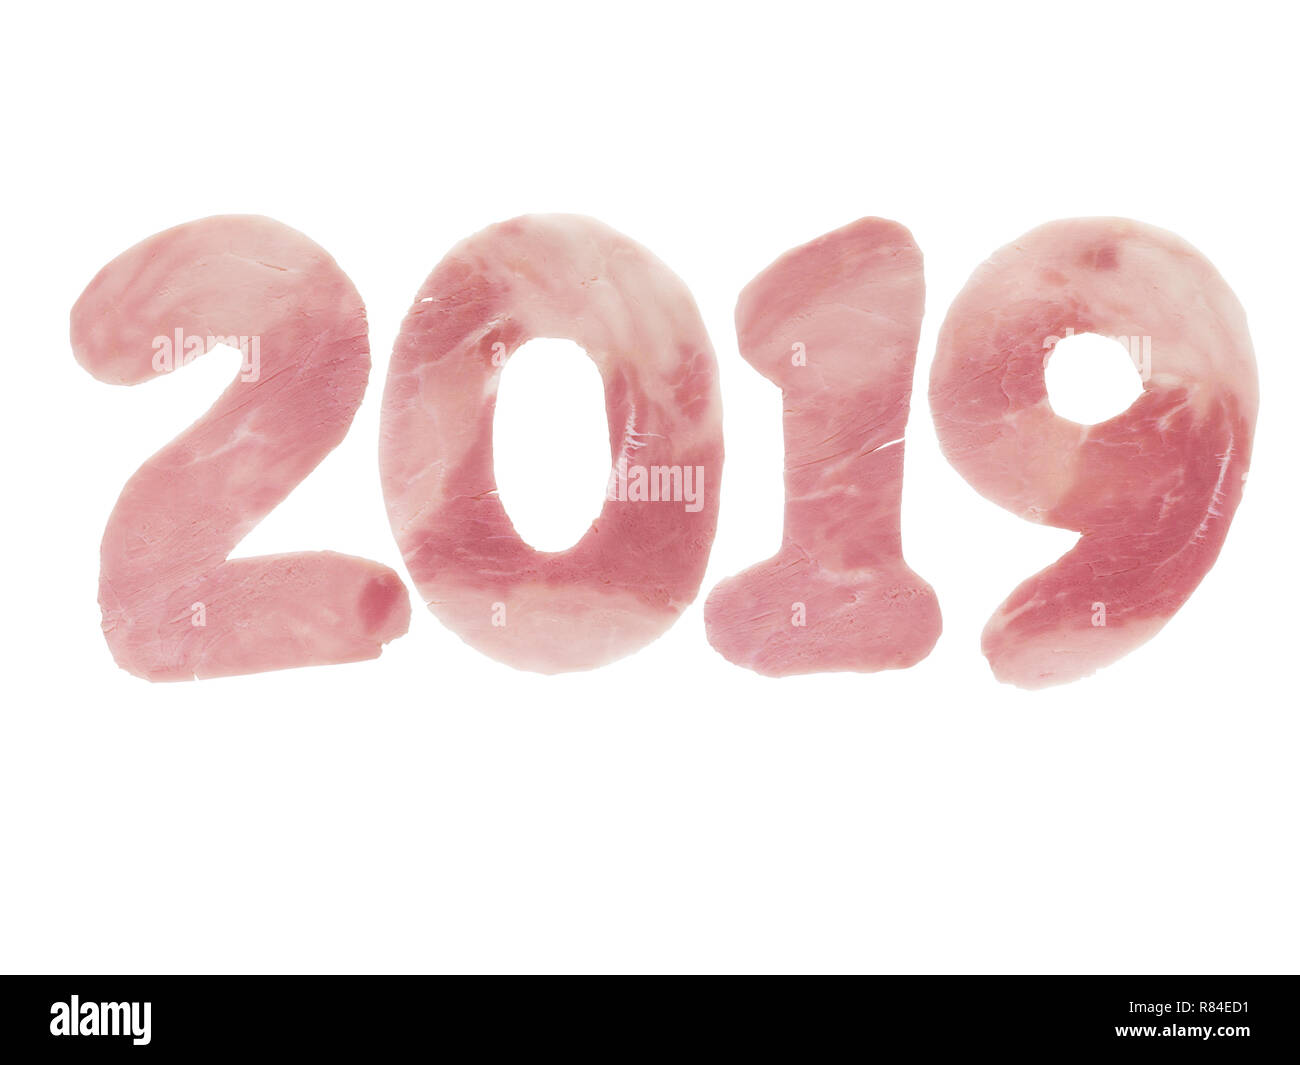 2019 year digits made of the pork ham as a symbol of new year isolated on white. Animal chinese horoscope. Stock Photo